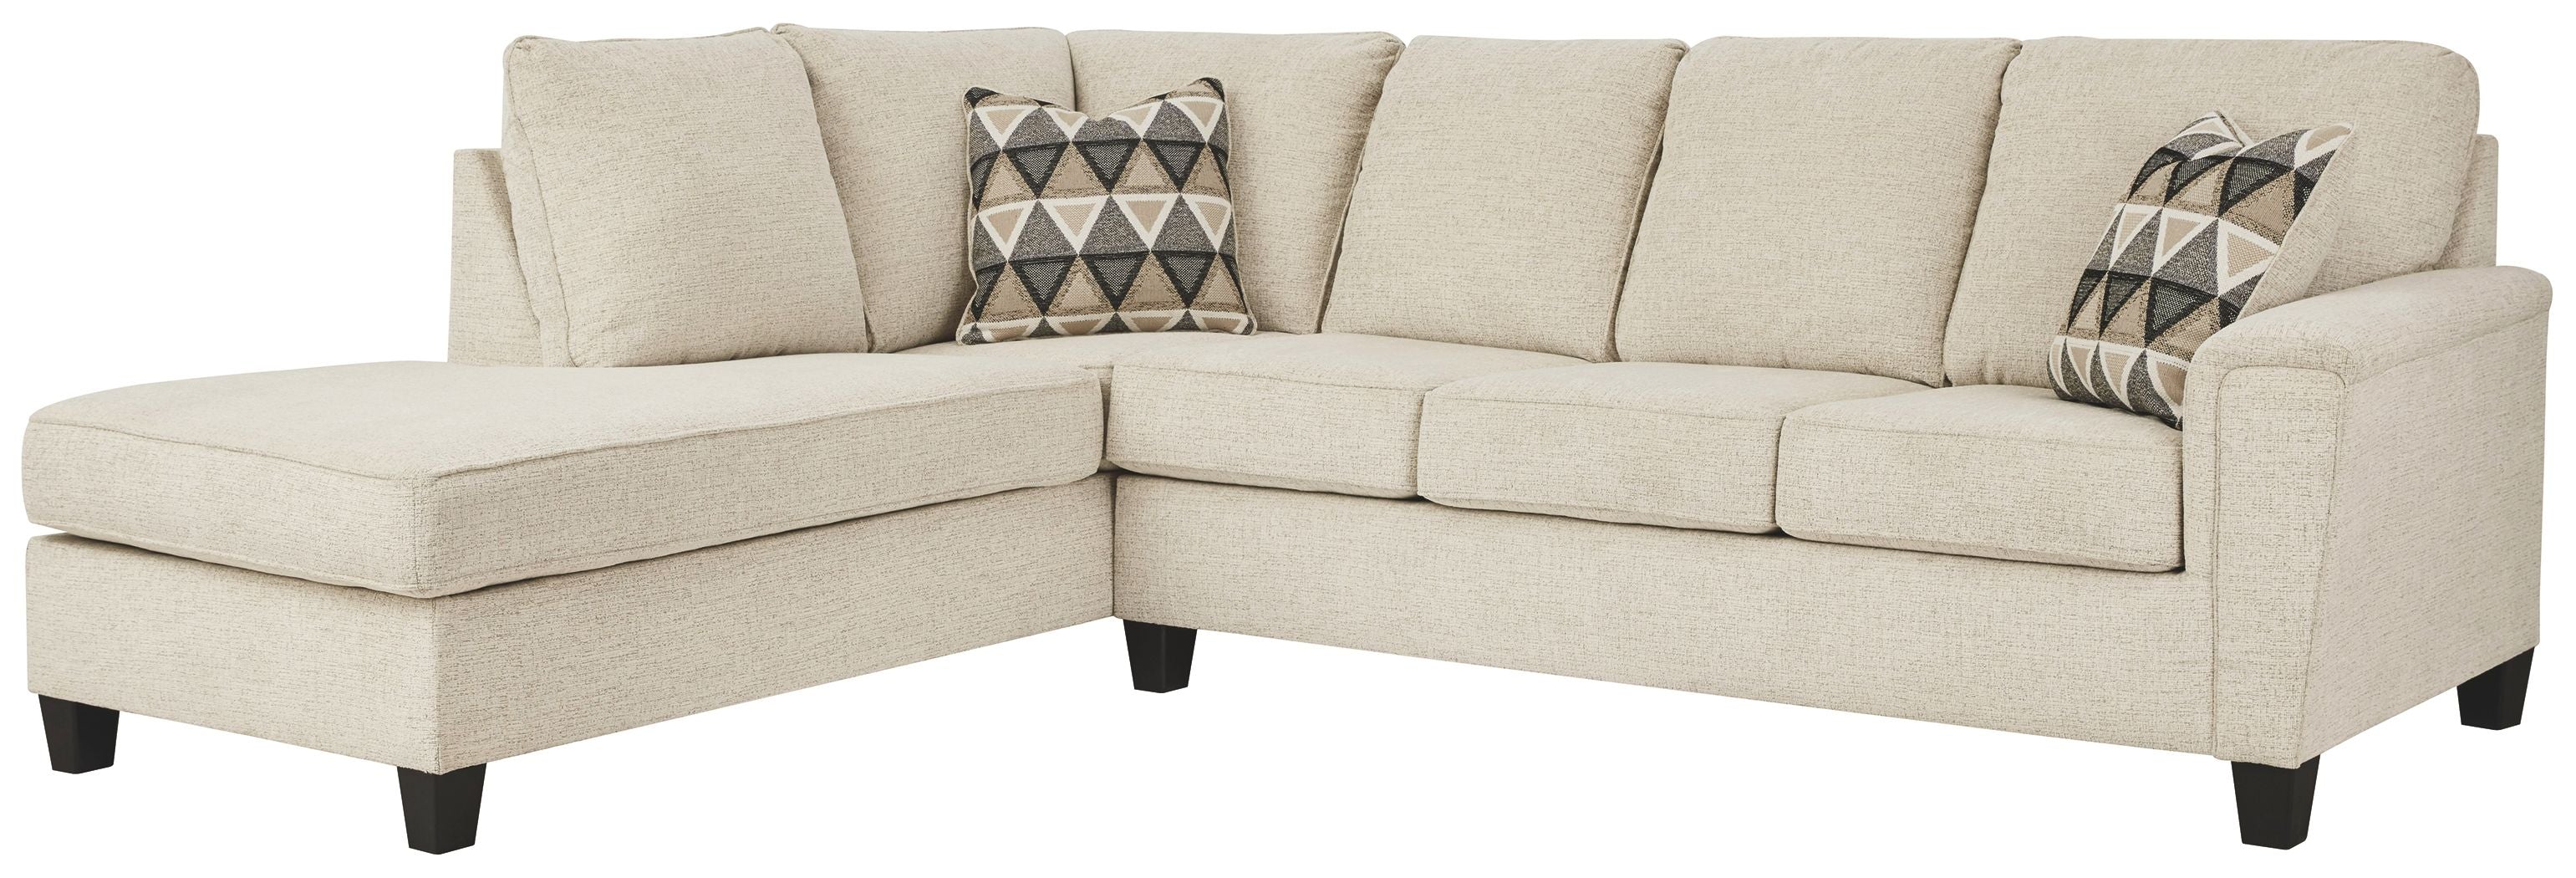 Abinger Sleeper Sectional w/ Chaise